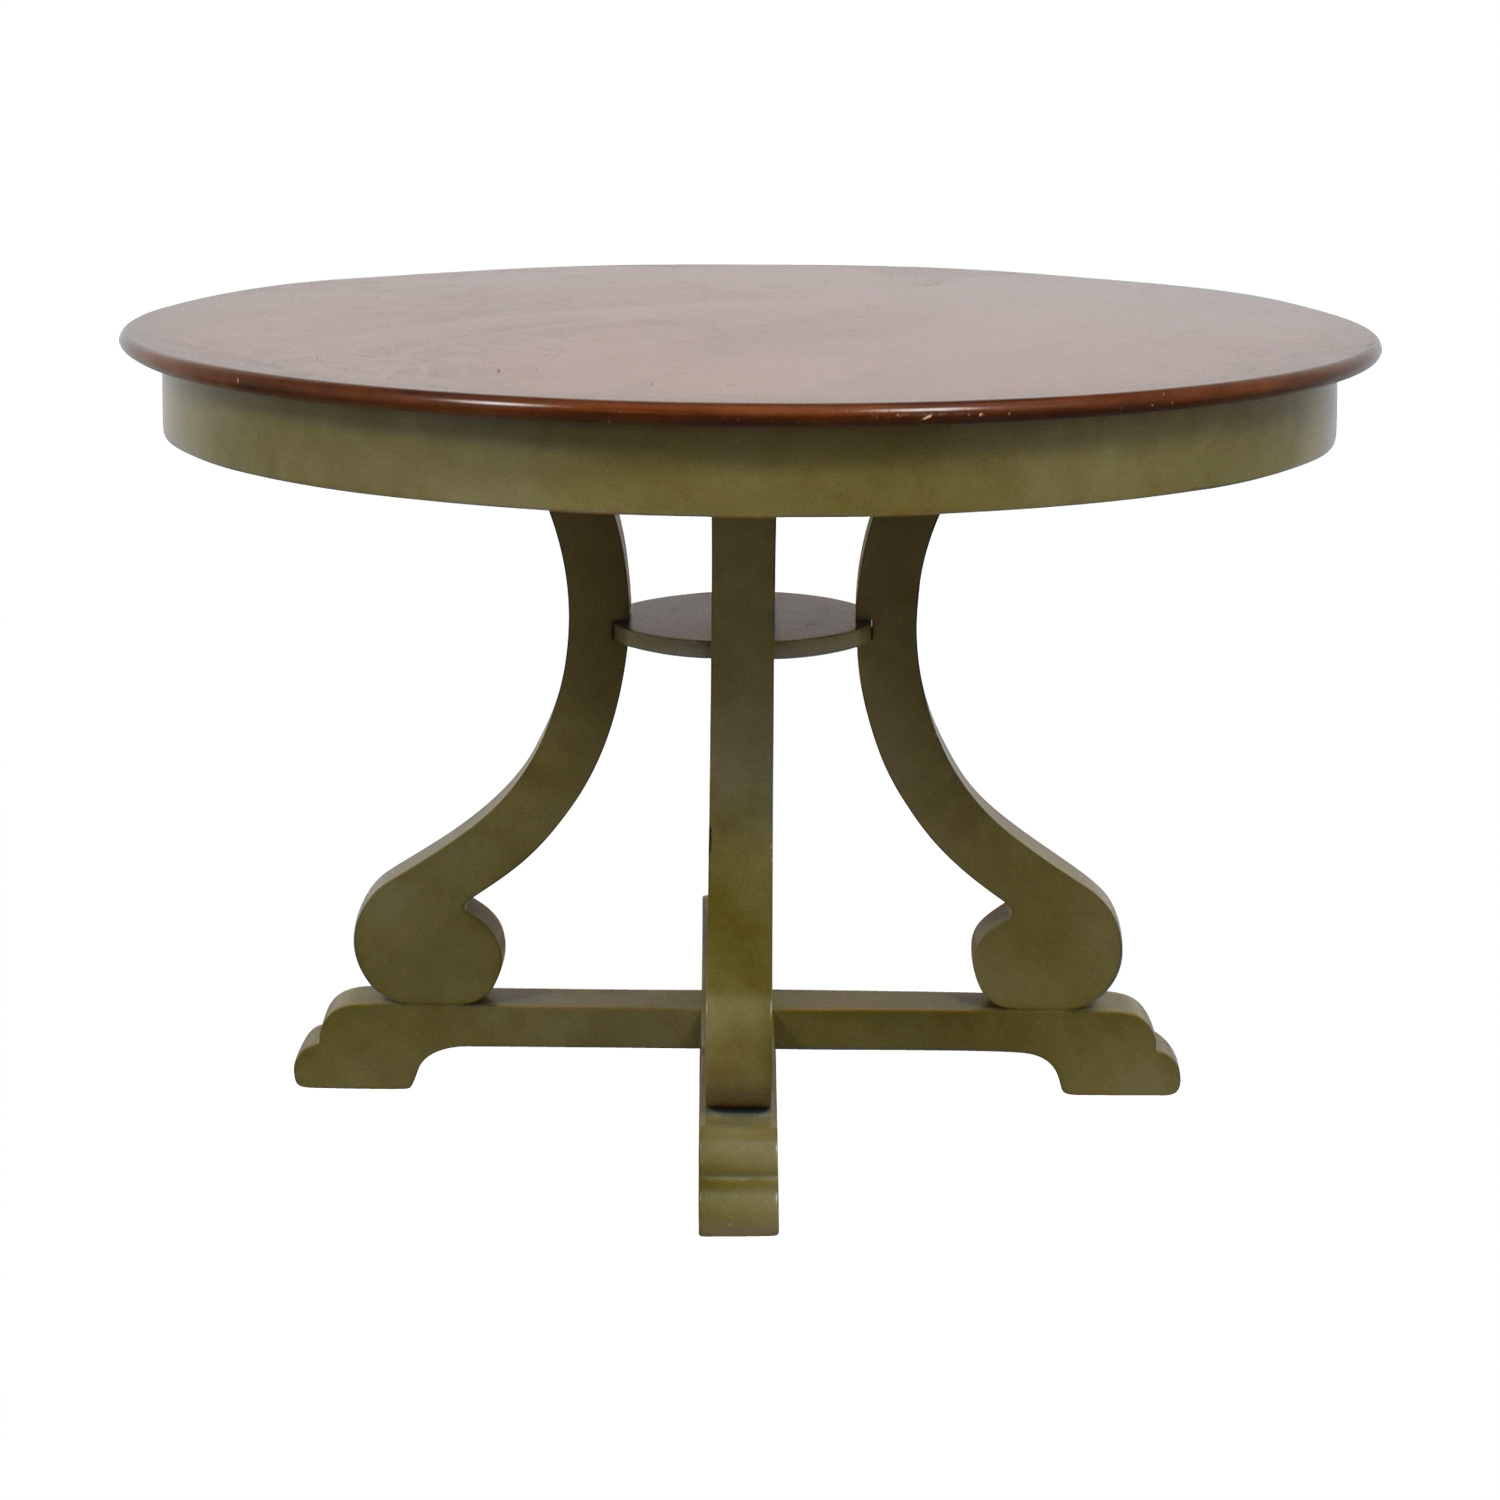 Minimalist Pier One Round Table for Simple Design